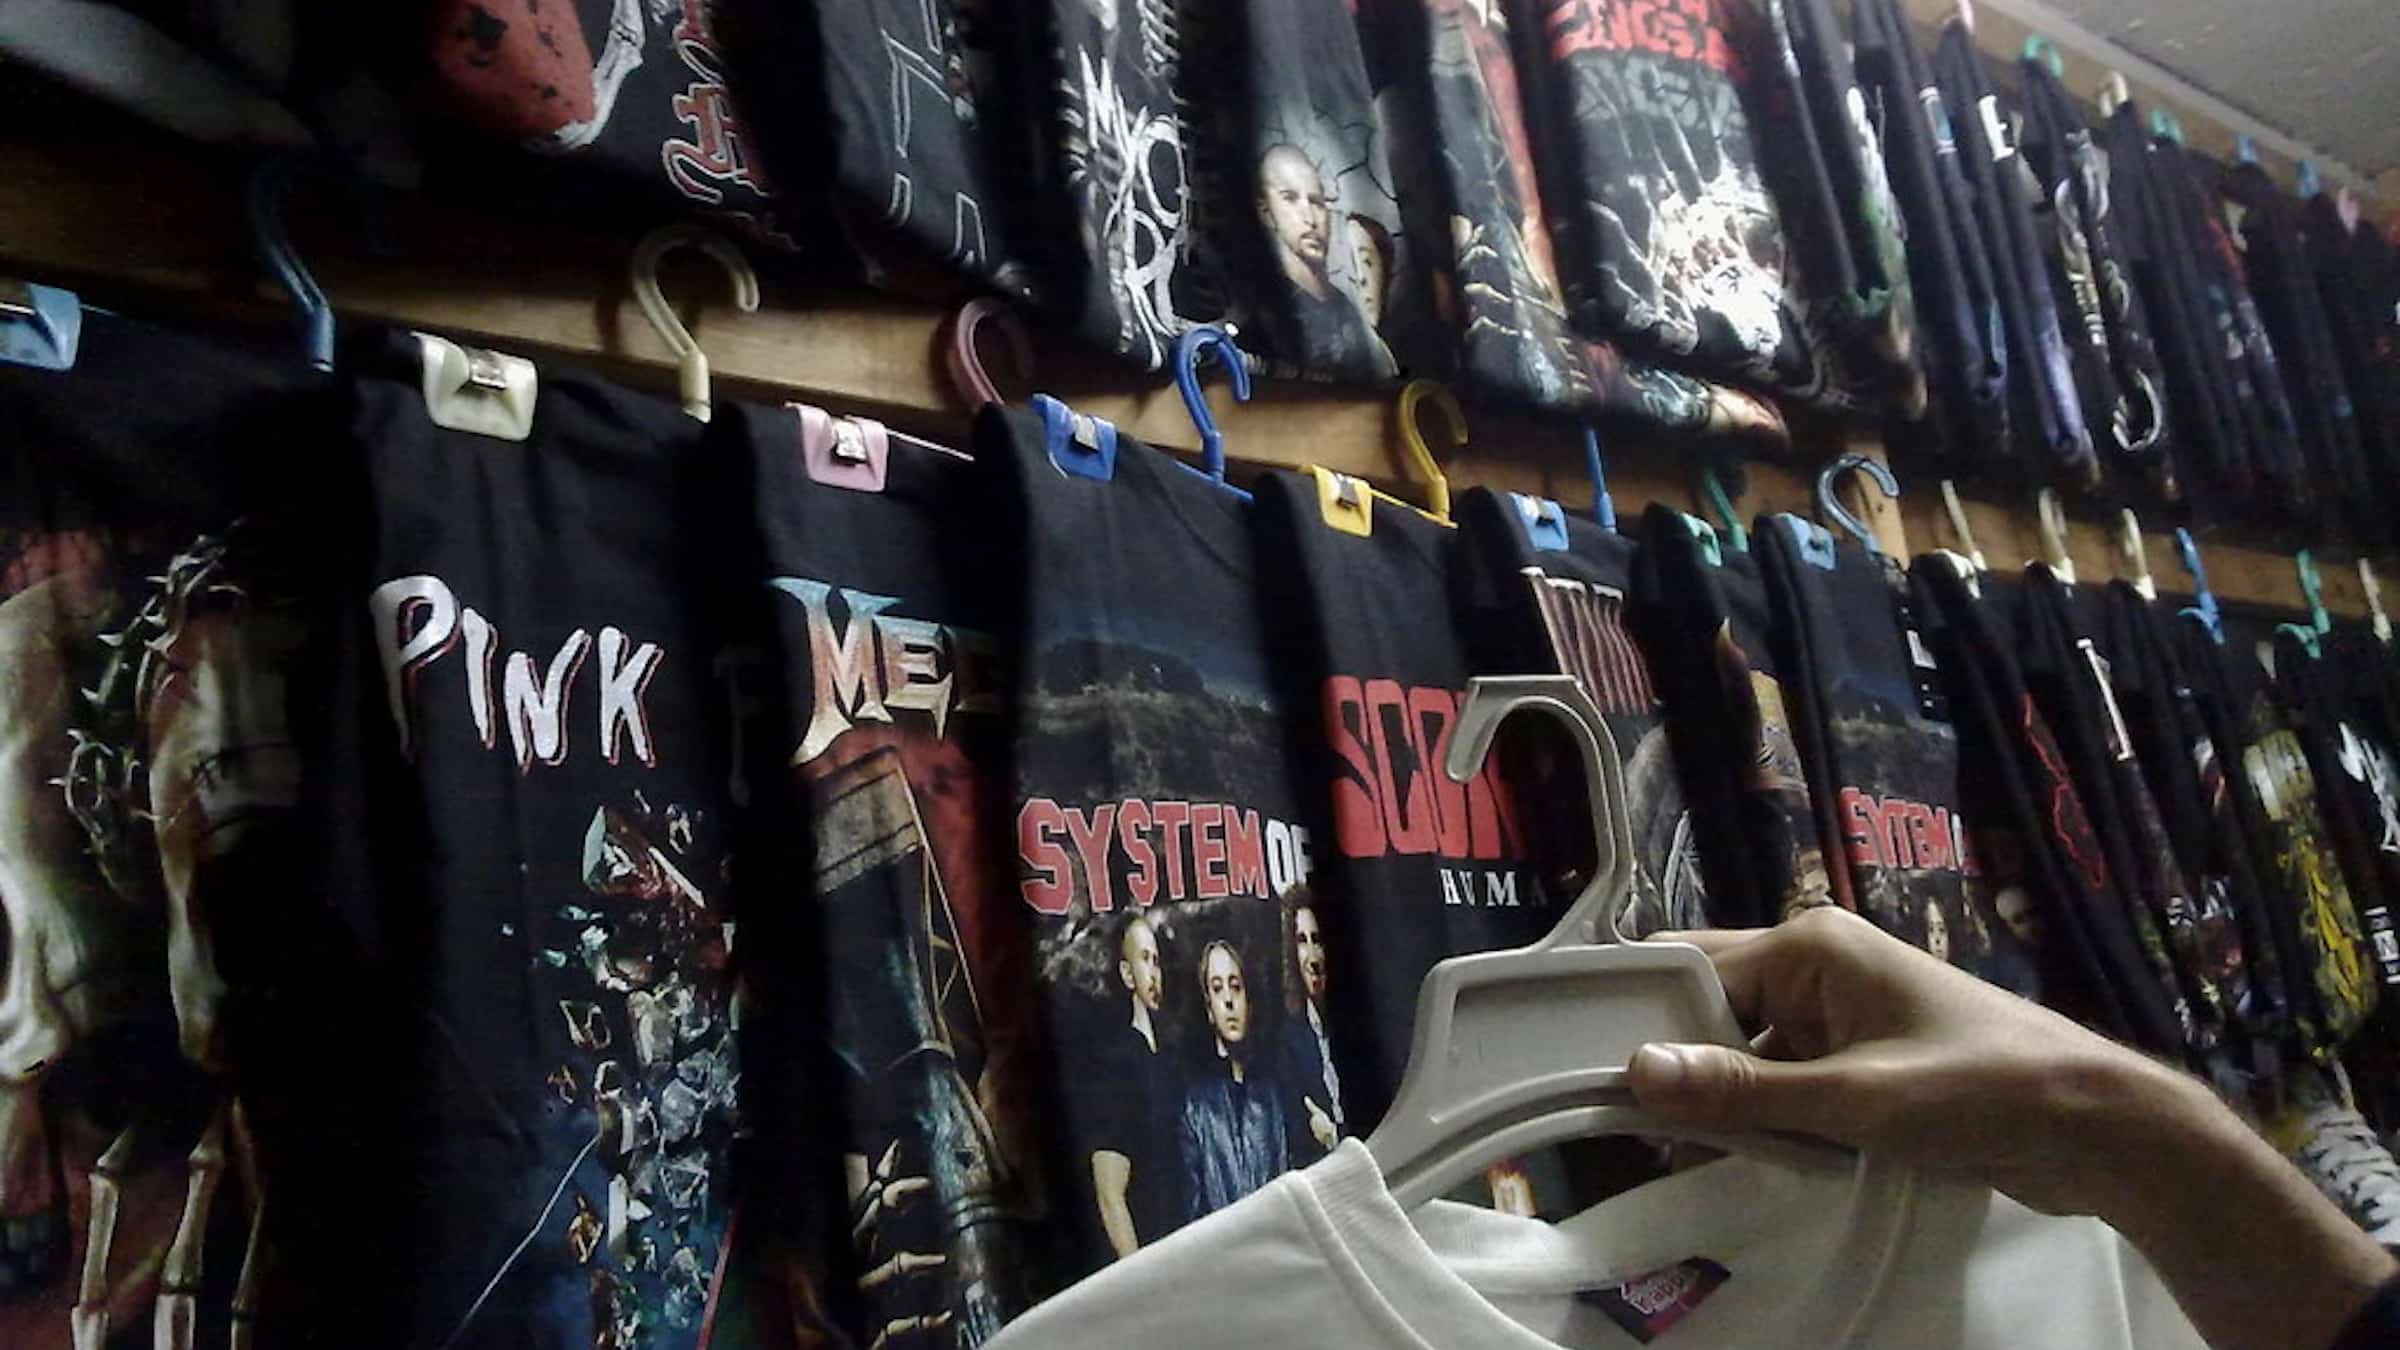 Woman Who Made £250,000 Selling Bootleg Rock And Metal T-shirts Ordered To Pay Back £140,000 Or Face Jailtime